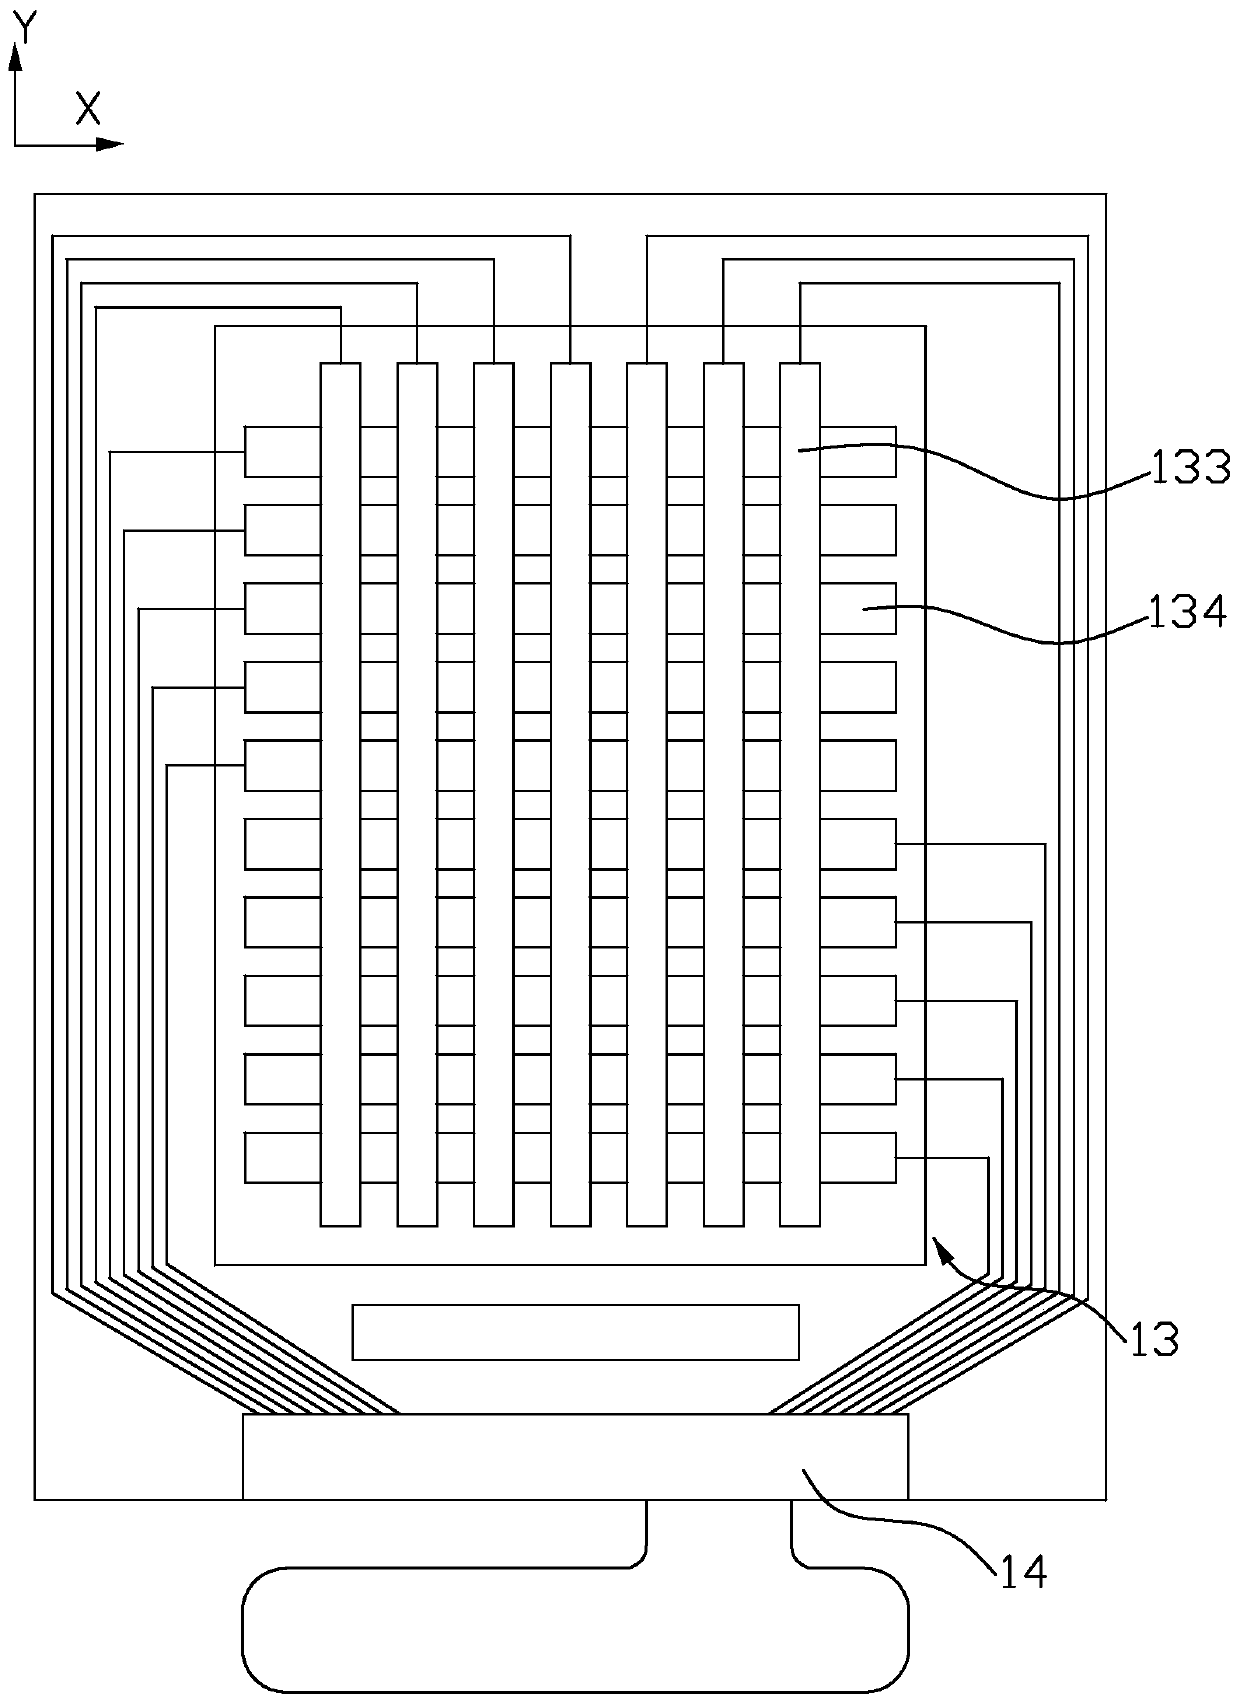 Embedded capacitive touch display panel